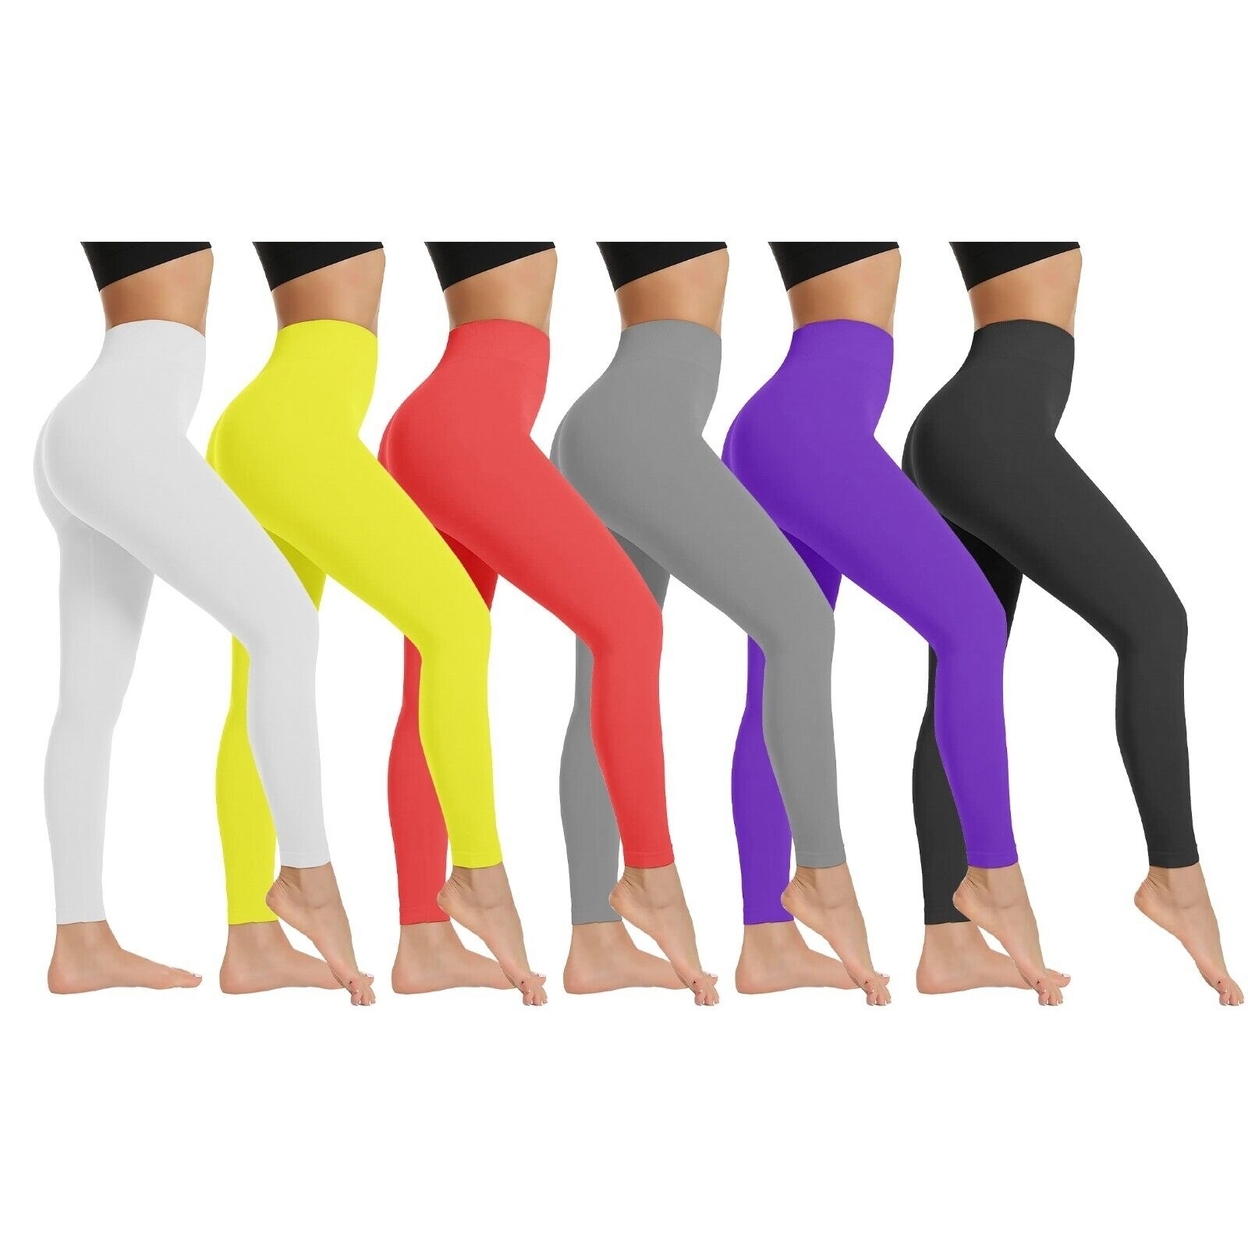 3-Pack: Women's High Waist Super Soft Active Athlete Stretch Yoga Cozy Leggings - Red,red,red, X-large